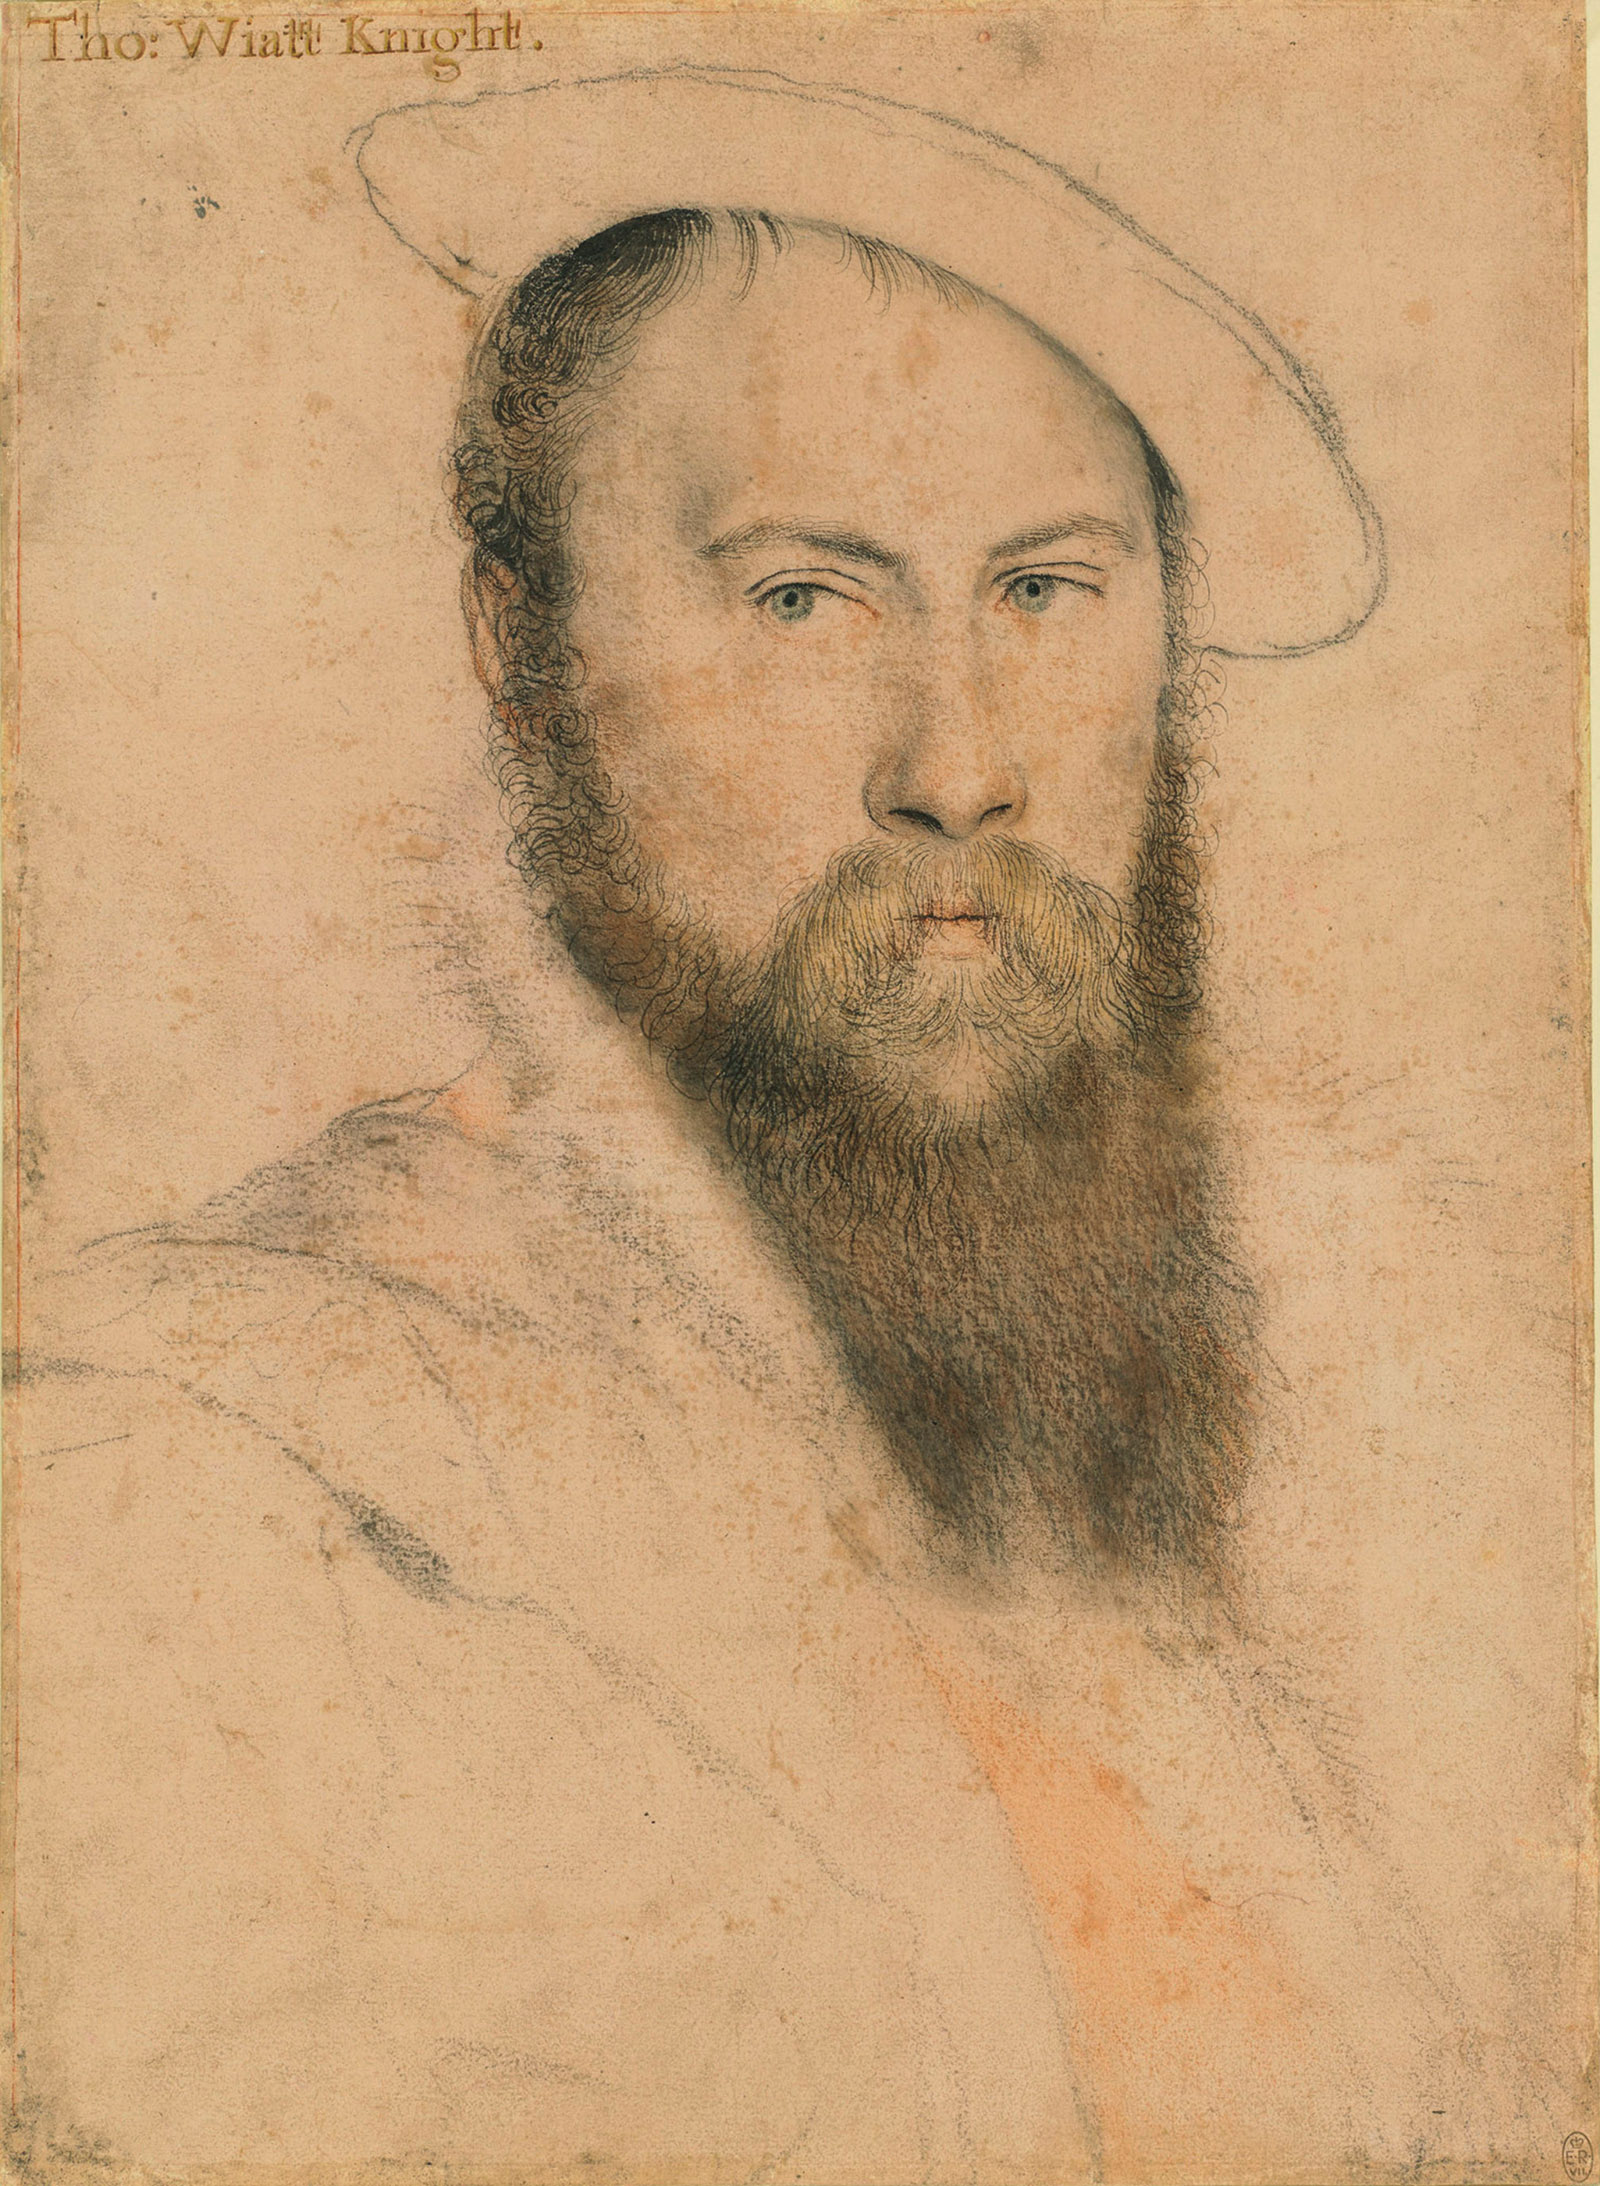 Thomas Wyatt; drawing by Hans Holbein the Younger, circa 1535